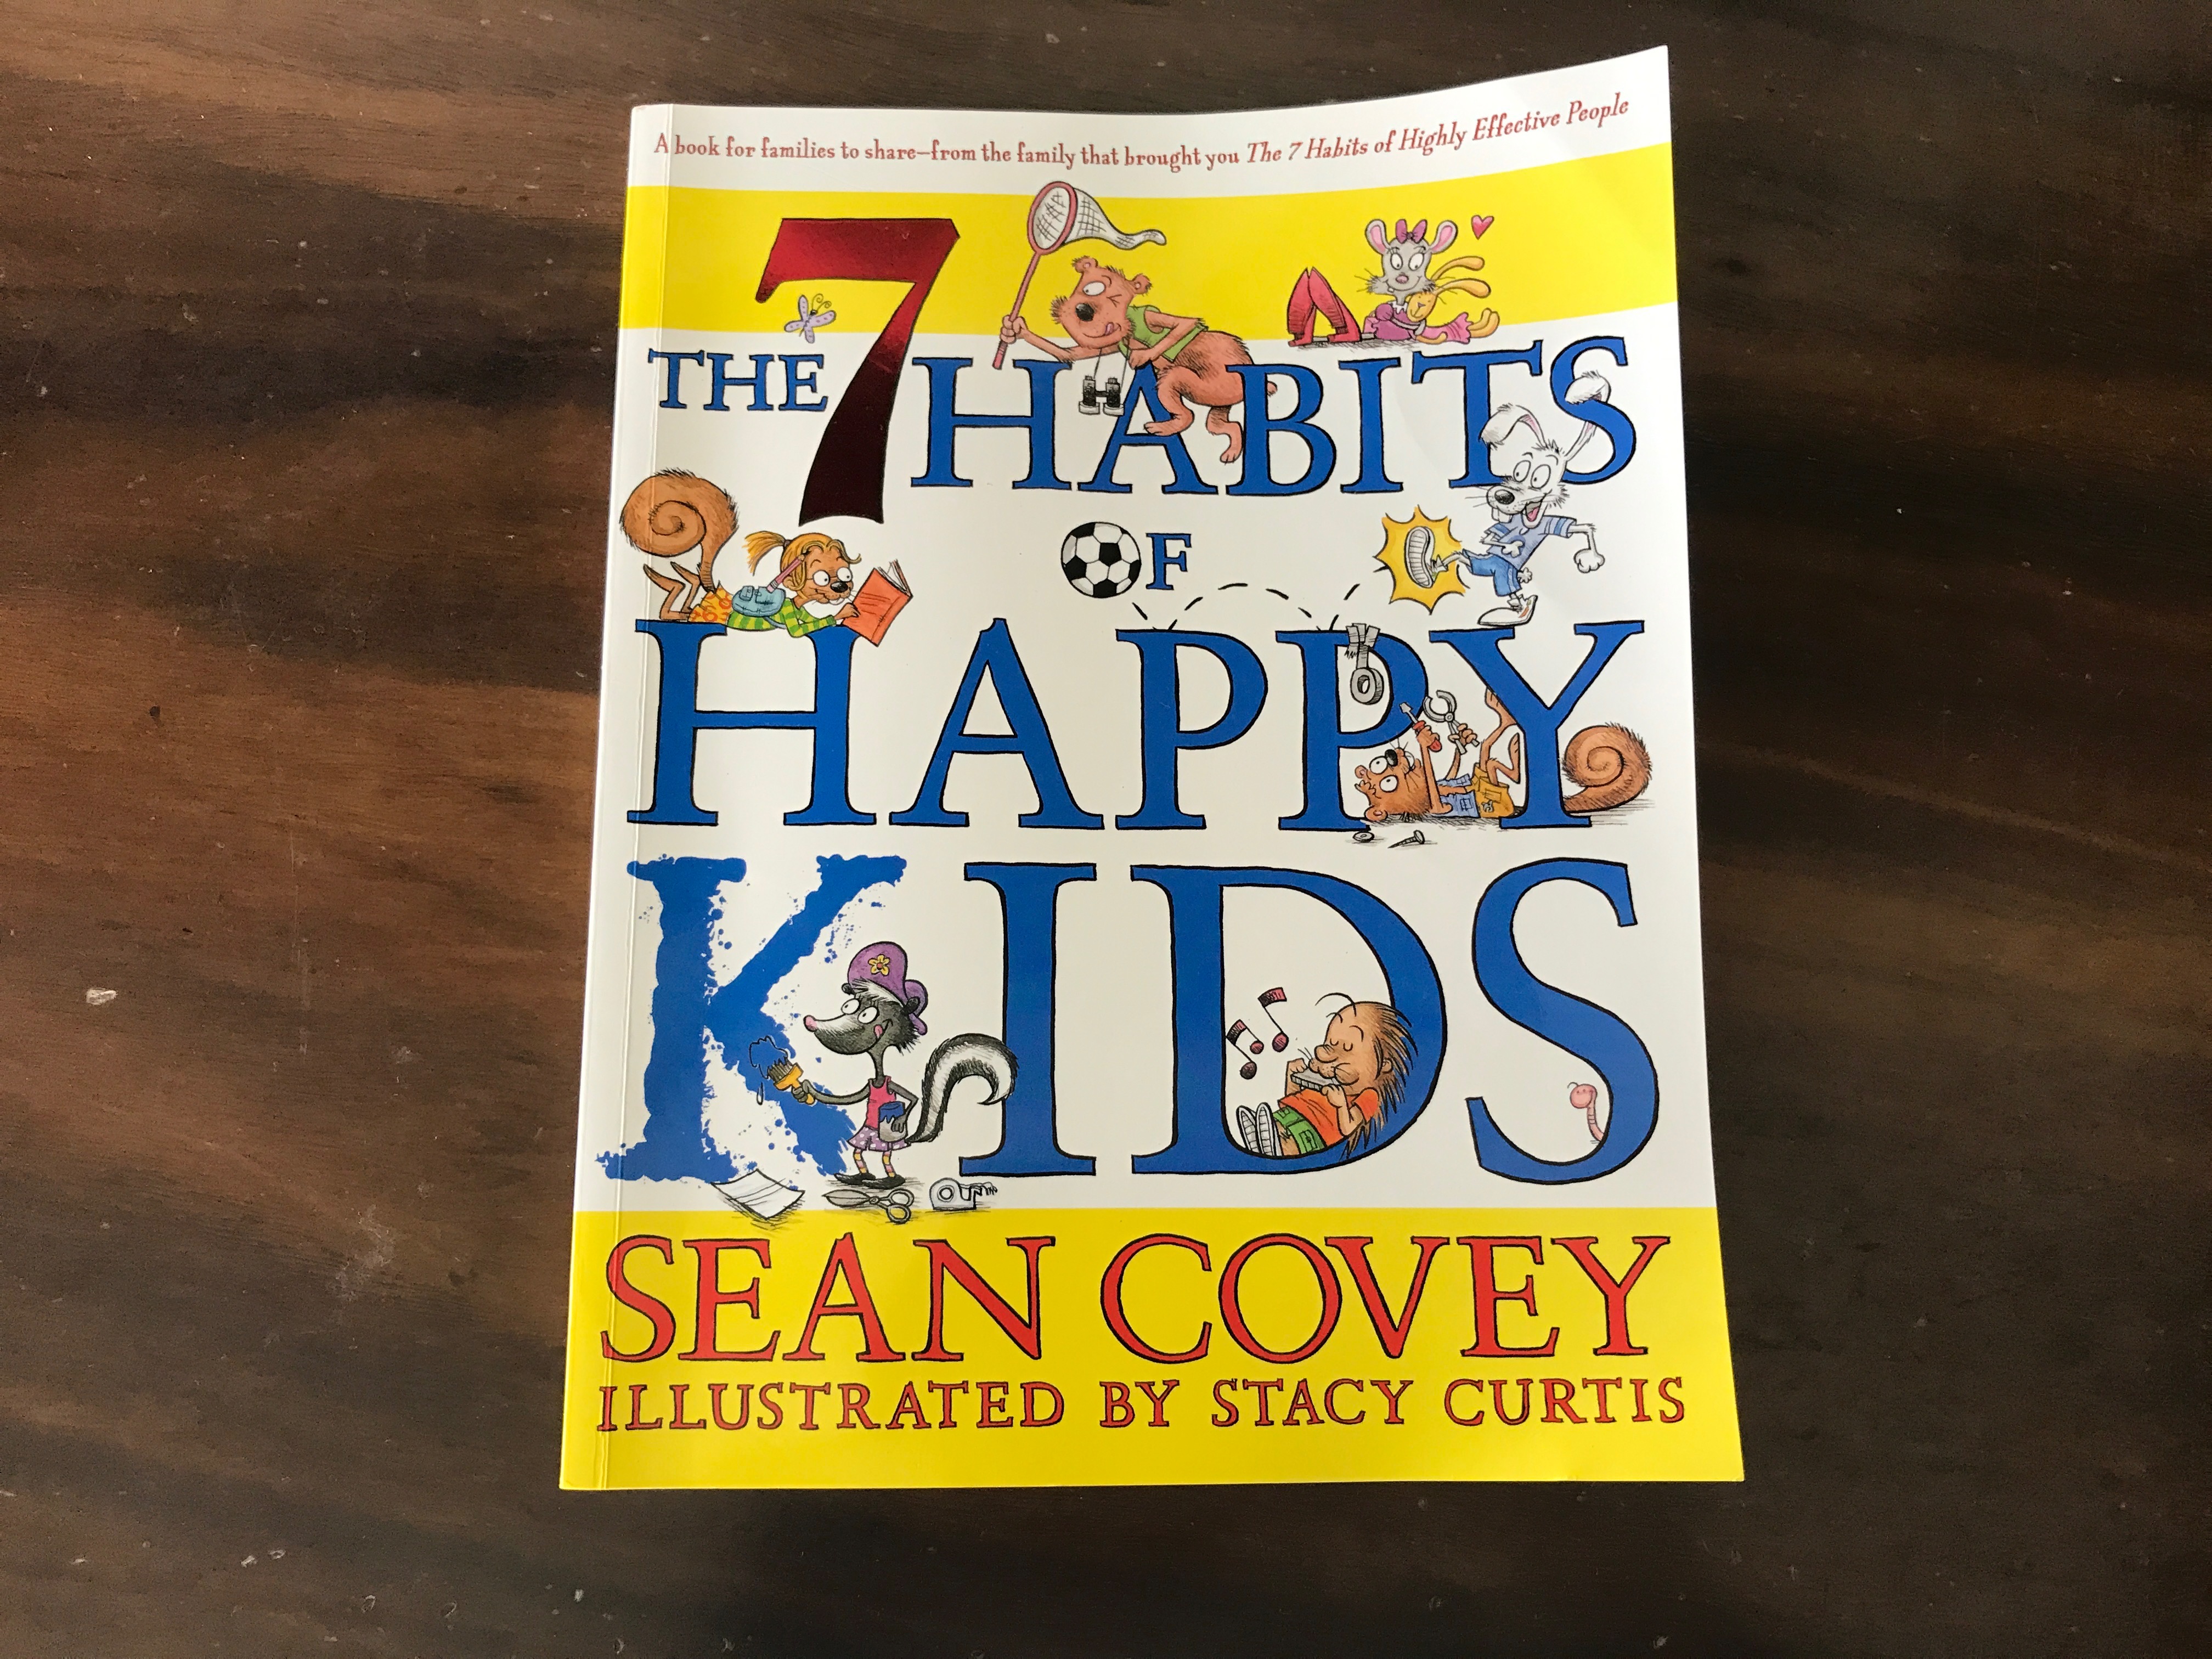 You are currently viewing The 7 Habits of Happy Kids: Sean Covey